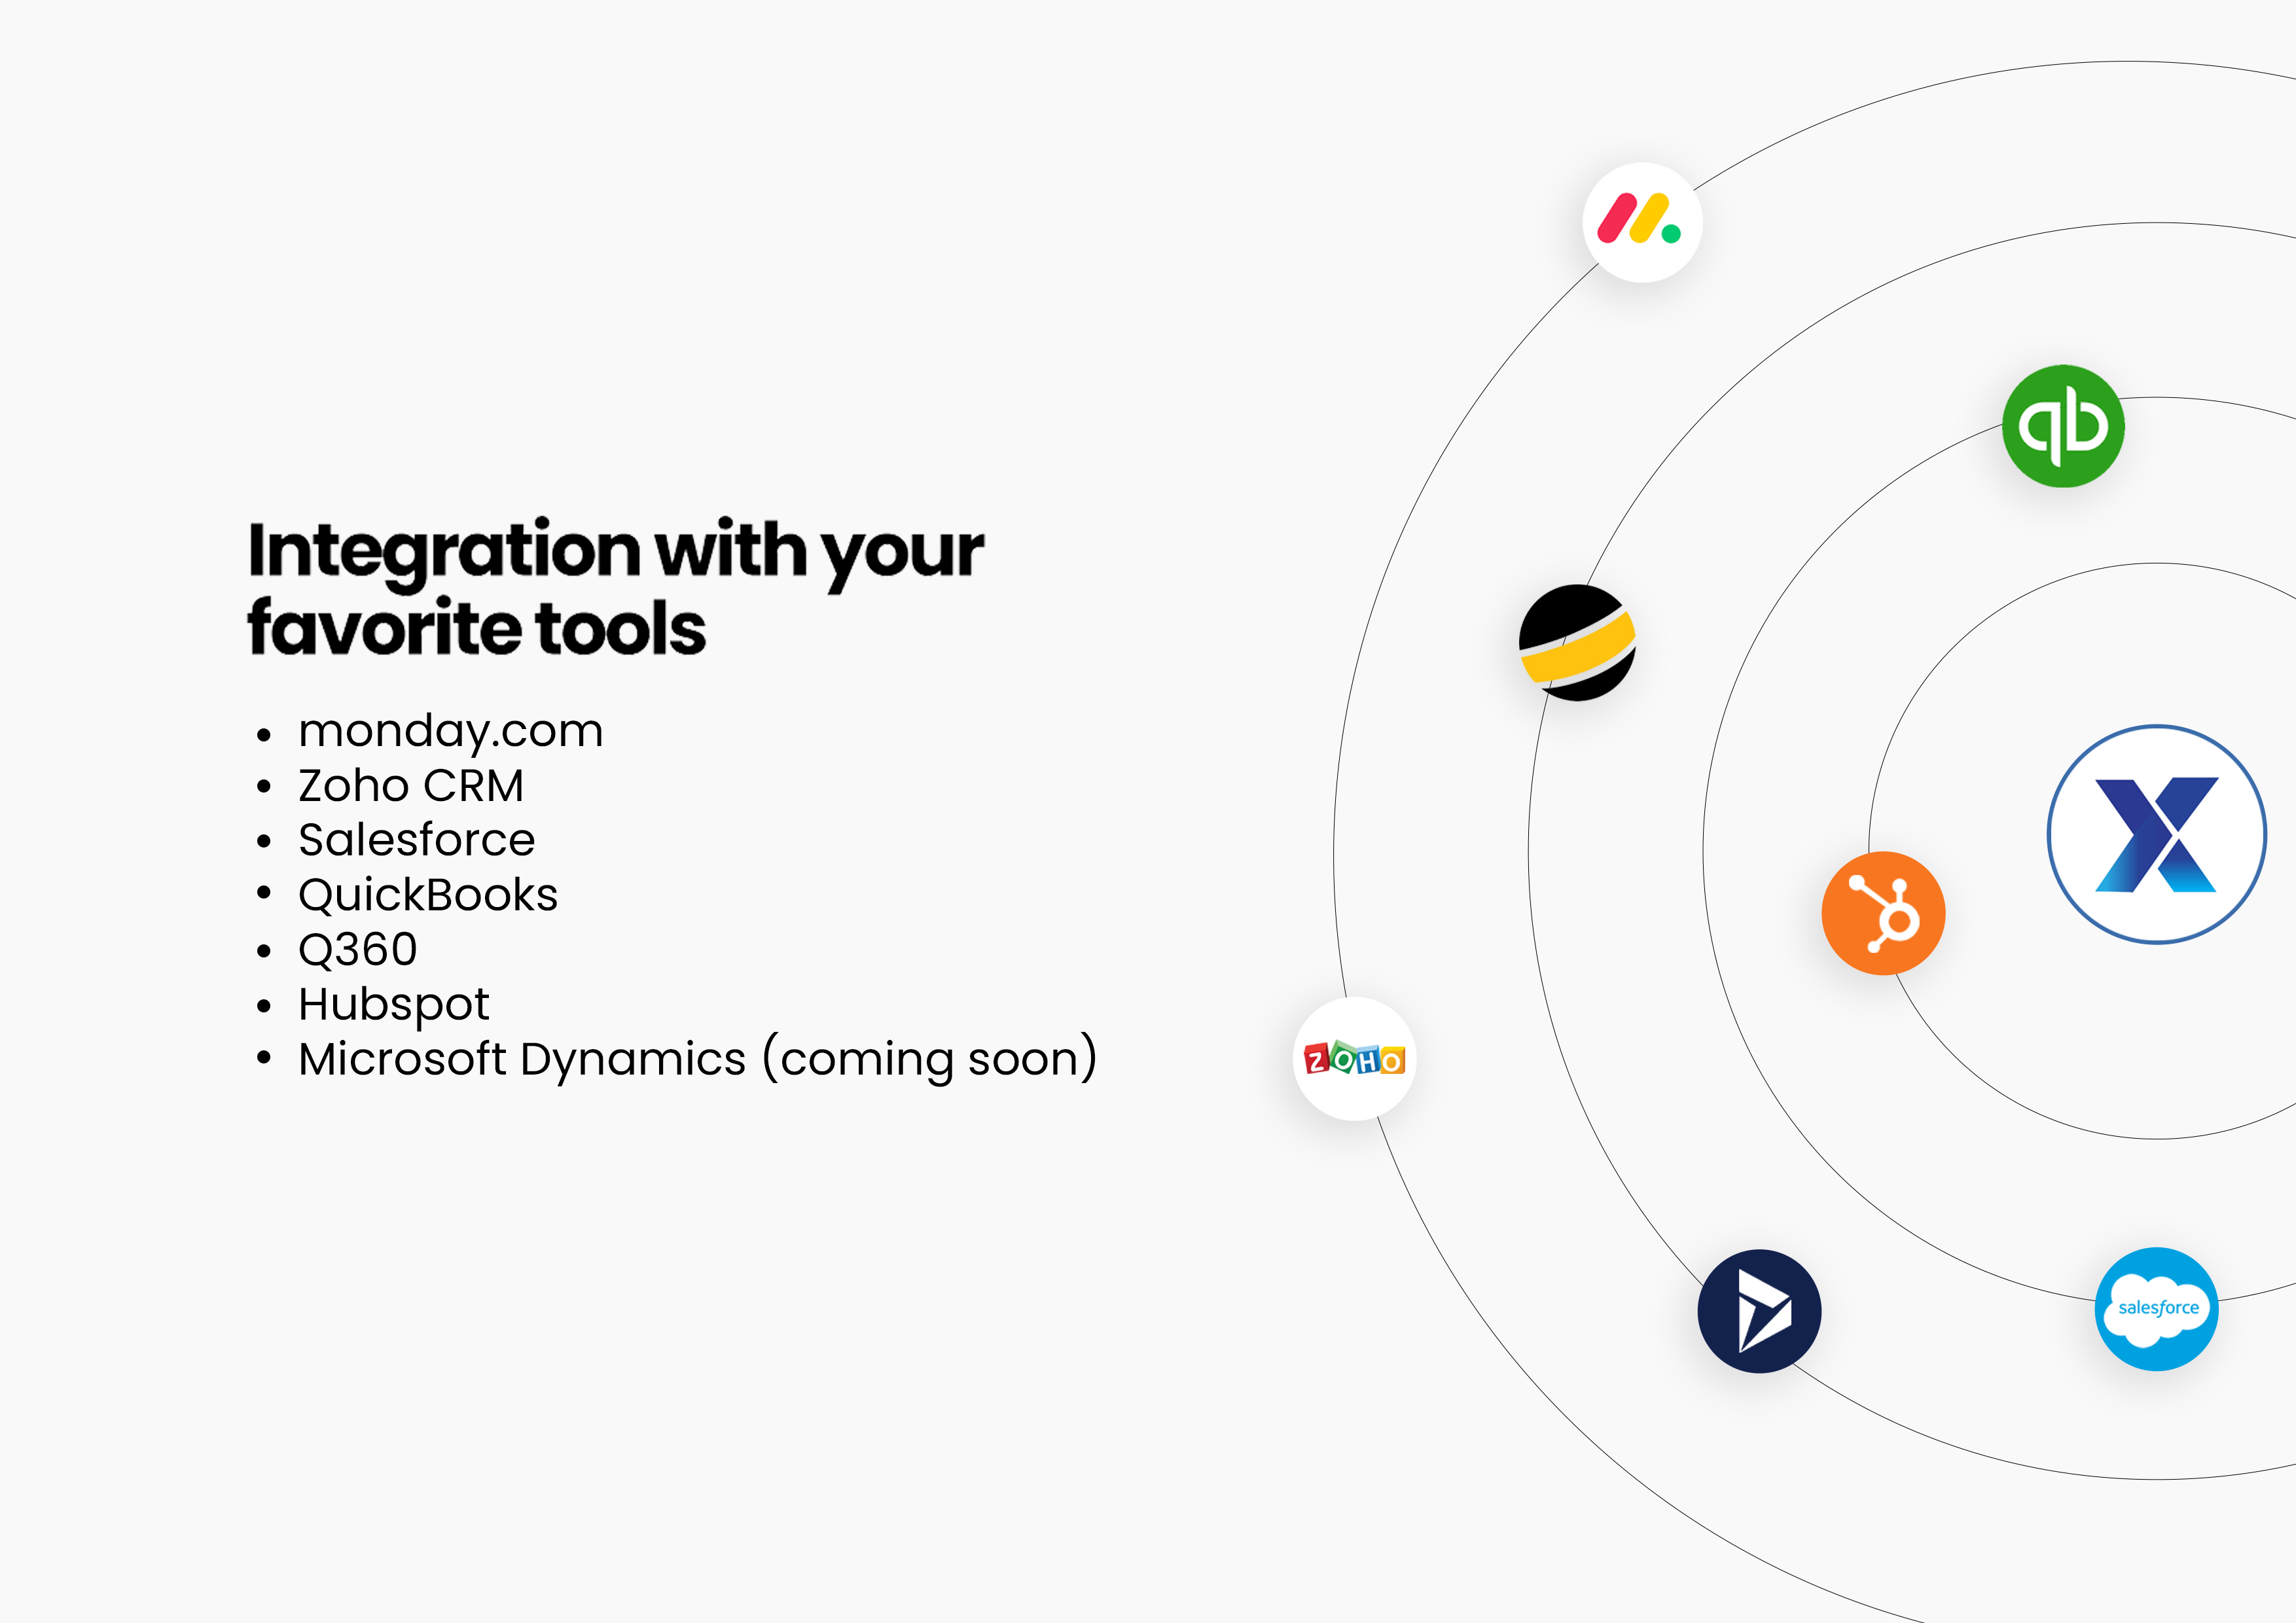 Integrate with all major business apps to maximize the functionality of your XTEN-AV account